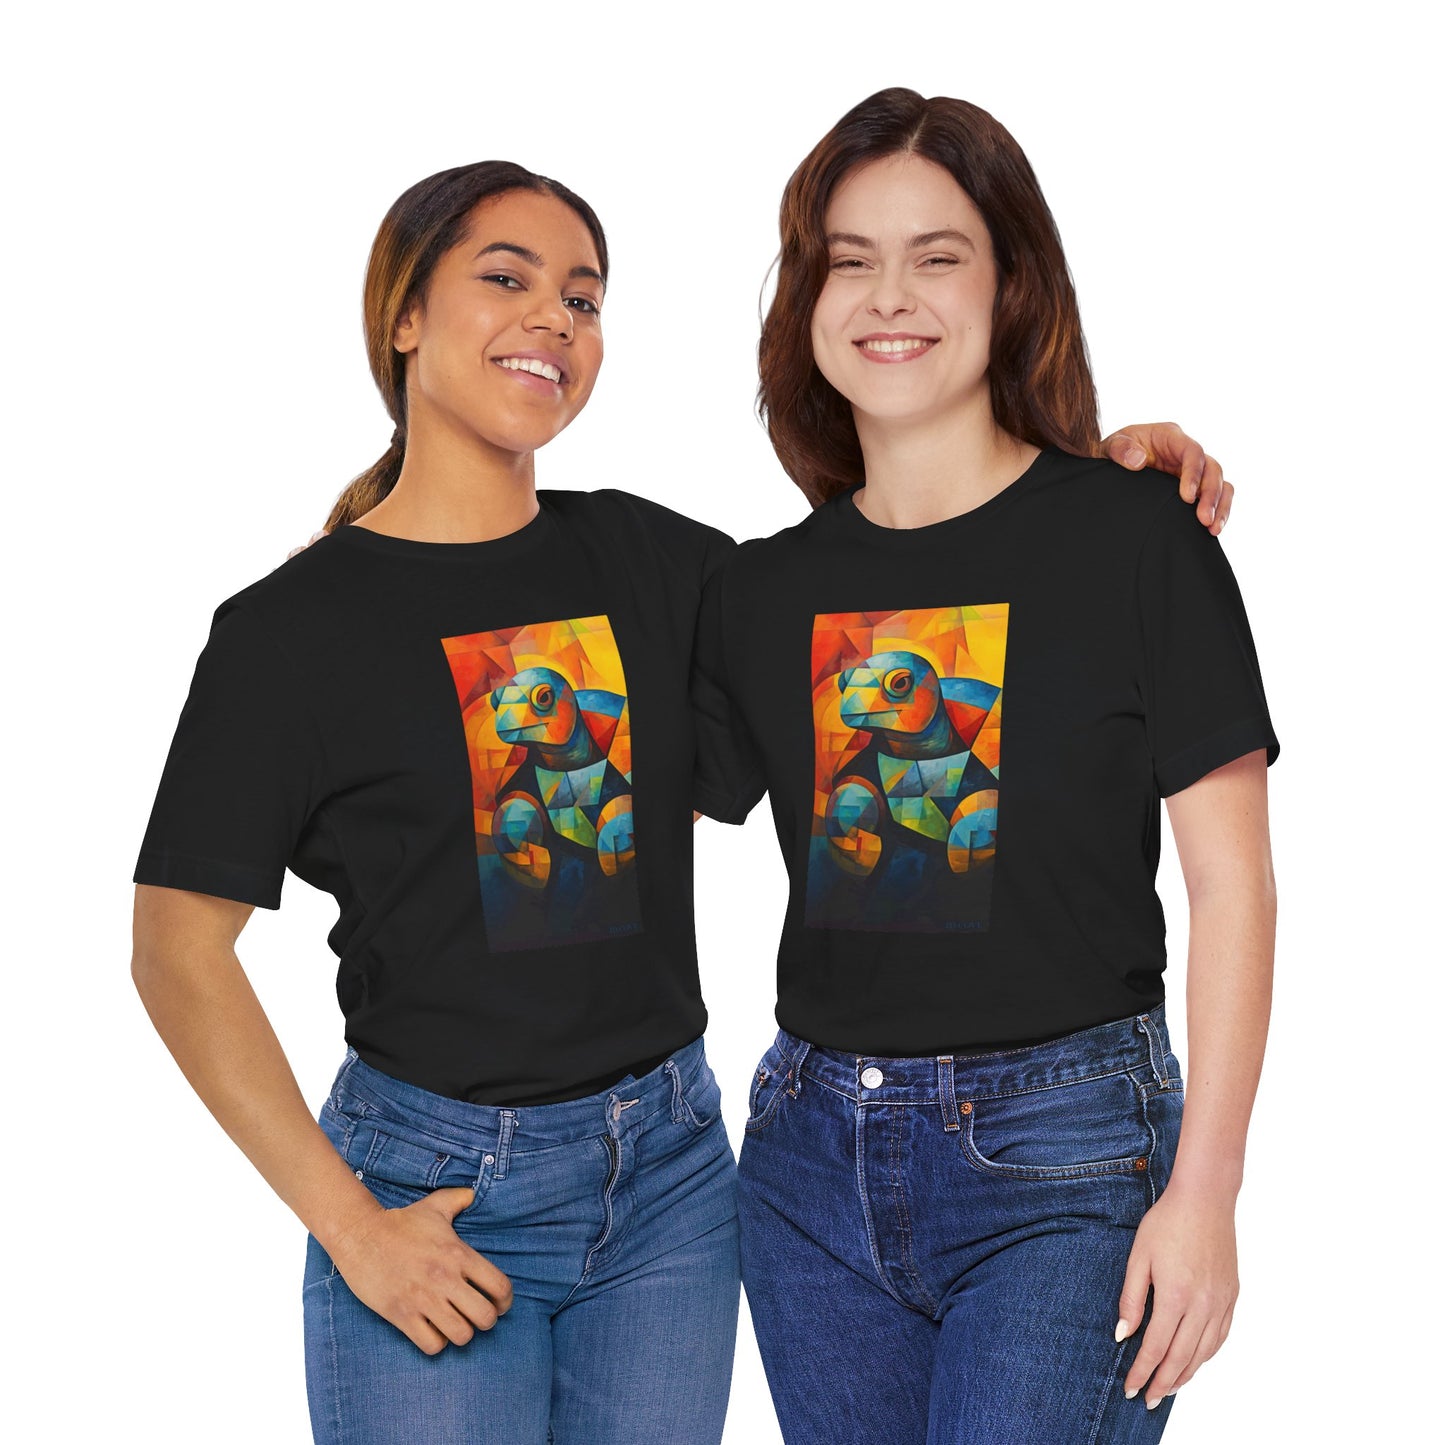 Colorful Cubist Turtle Graphic Tee - Unisex Eco-Friendly Cotton Shirt by JD Cove